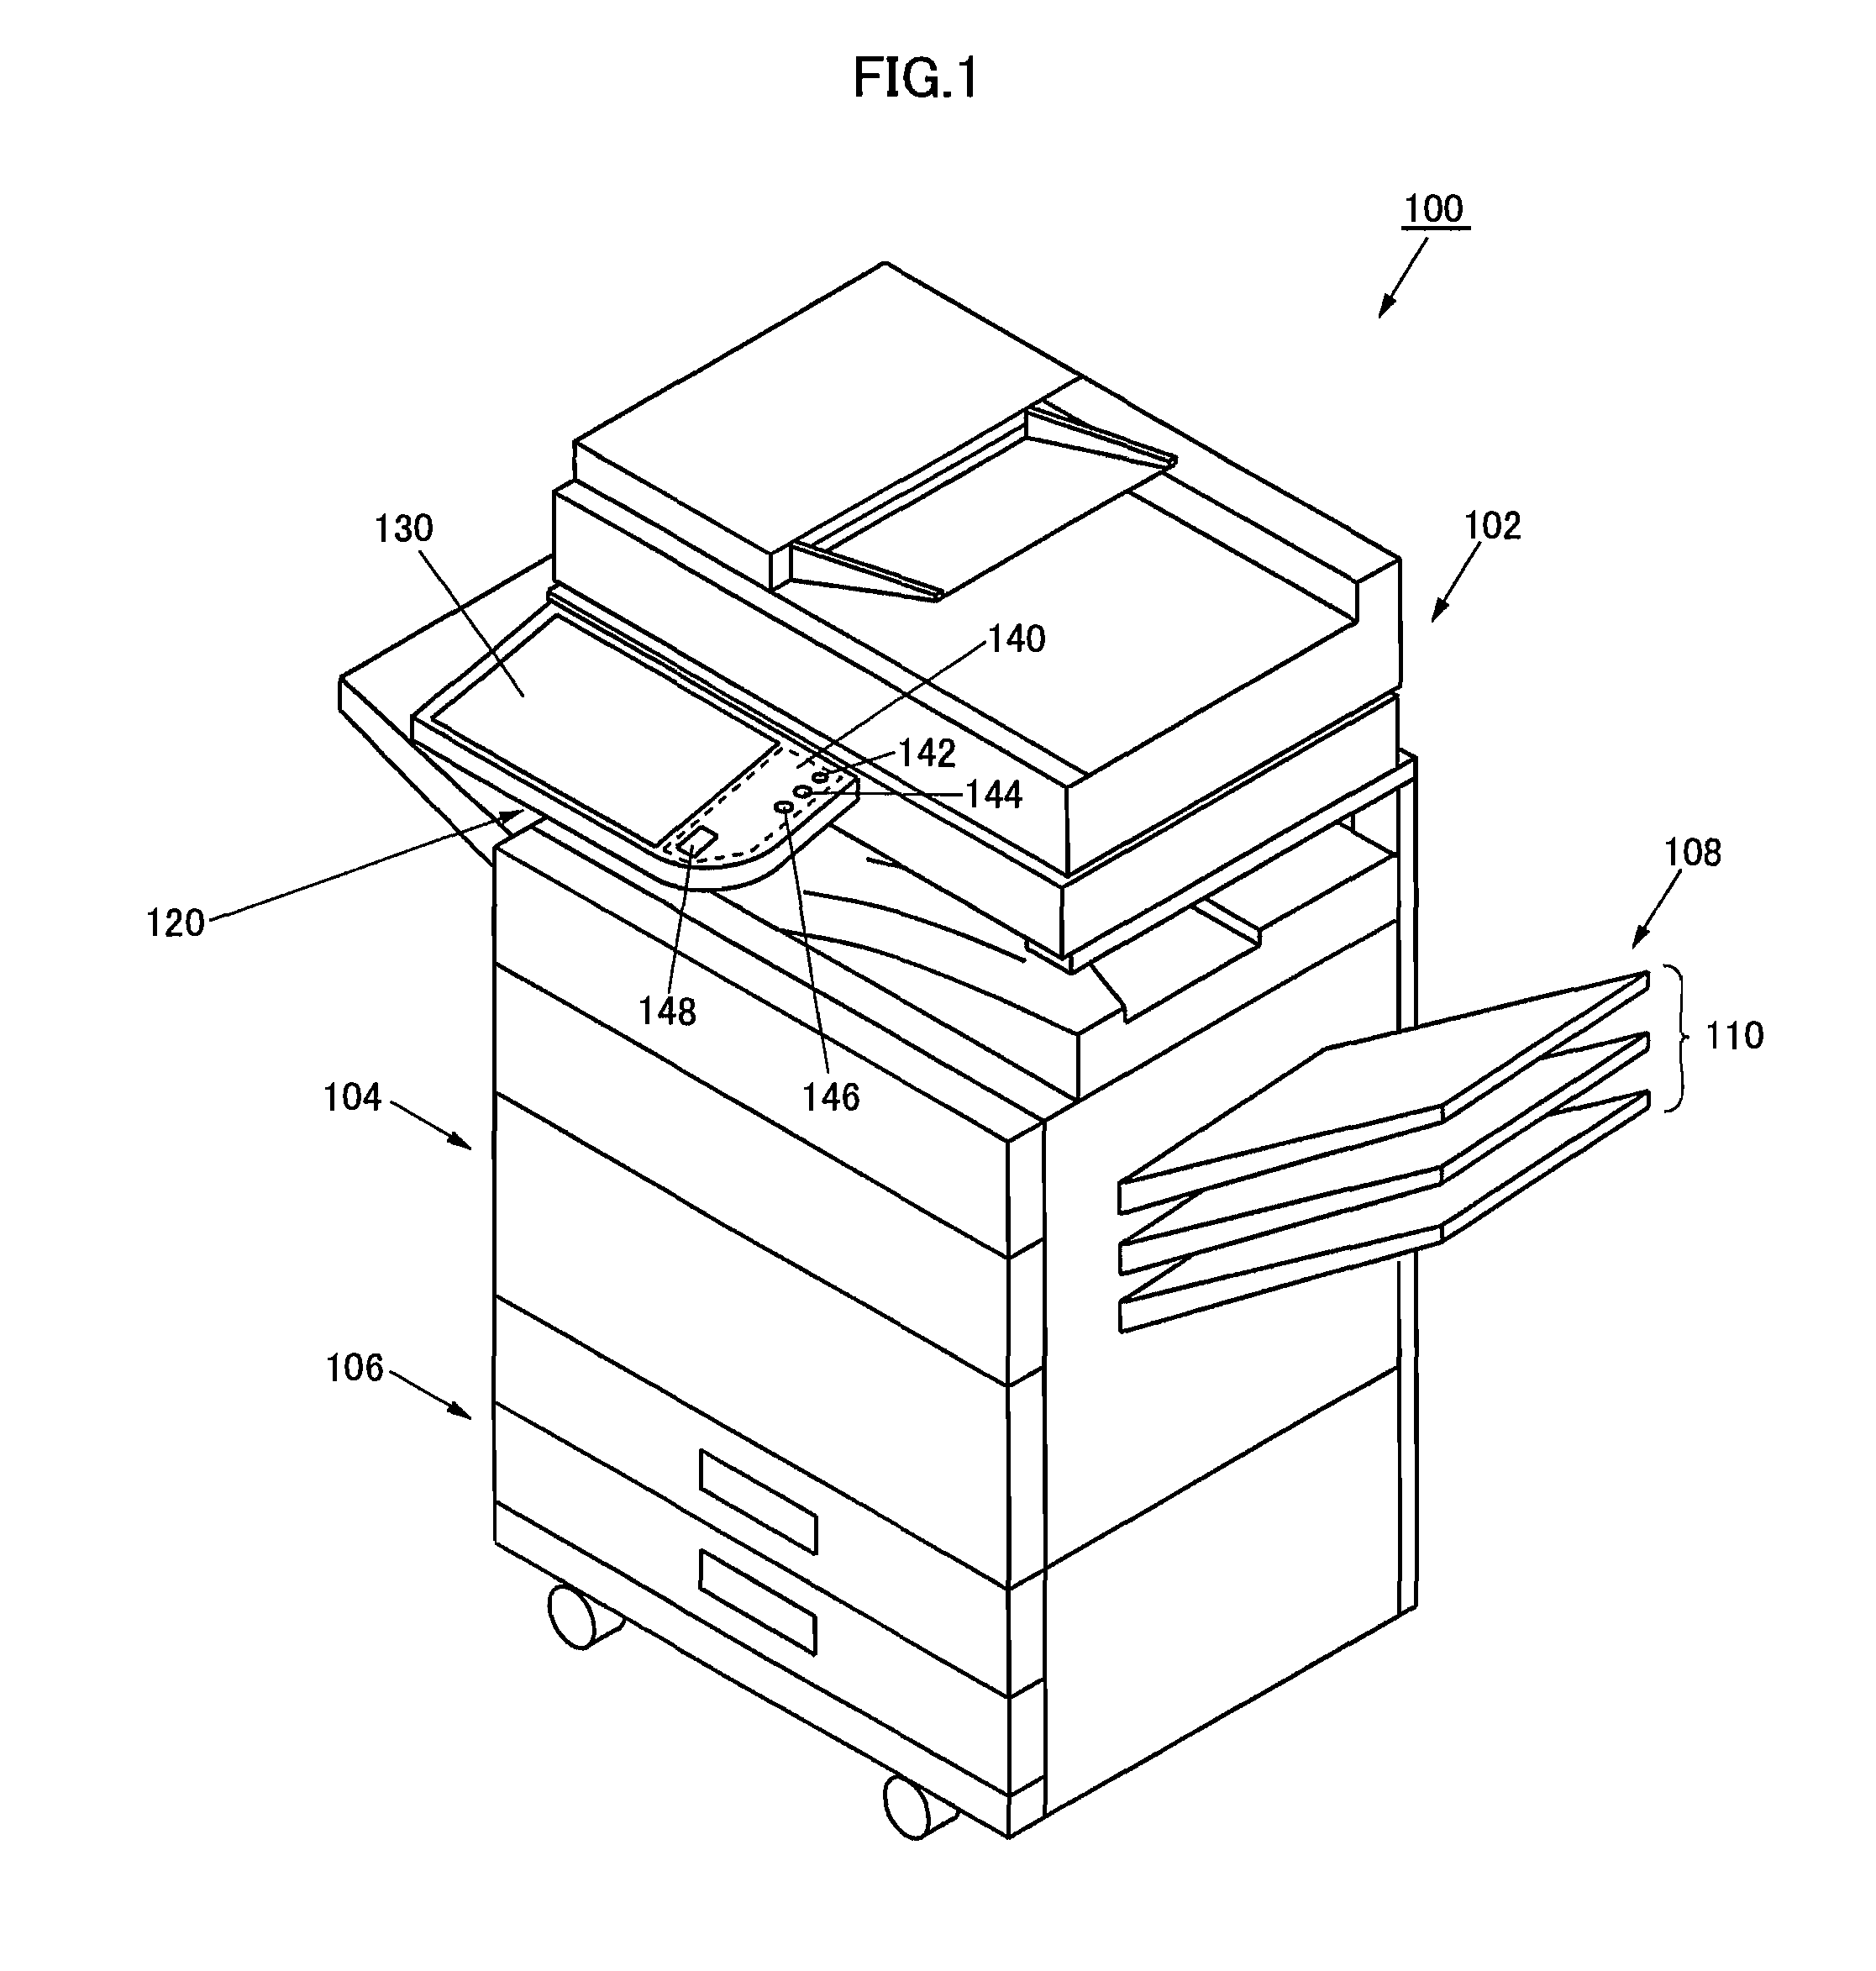 Display device, electronic device and image processing apparatus including the display device, and method of displaying information